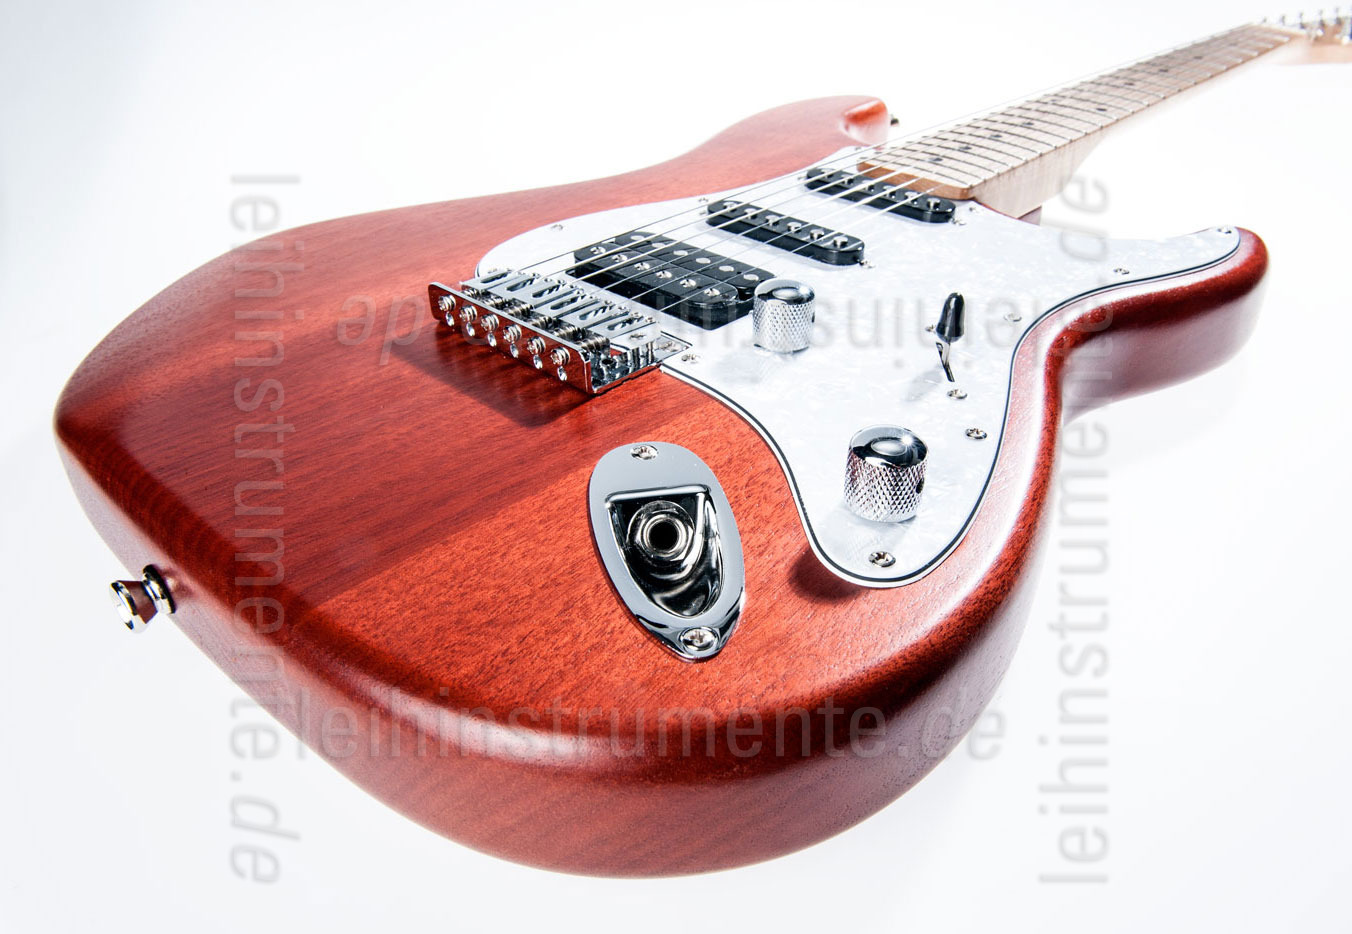 to article description / price Electric Guitar BERSTECHER New Whisky + hard case - made in Germany